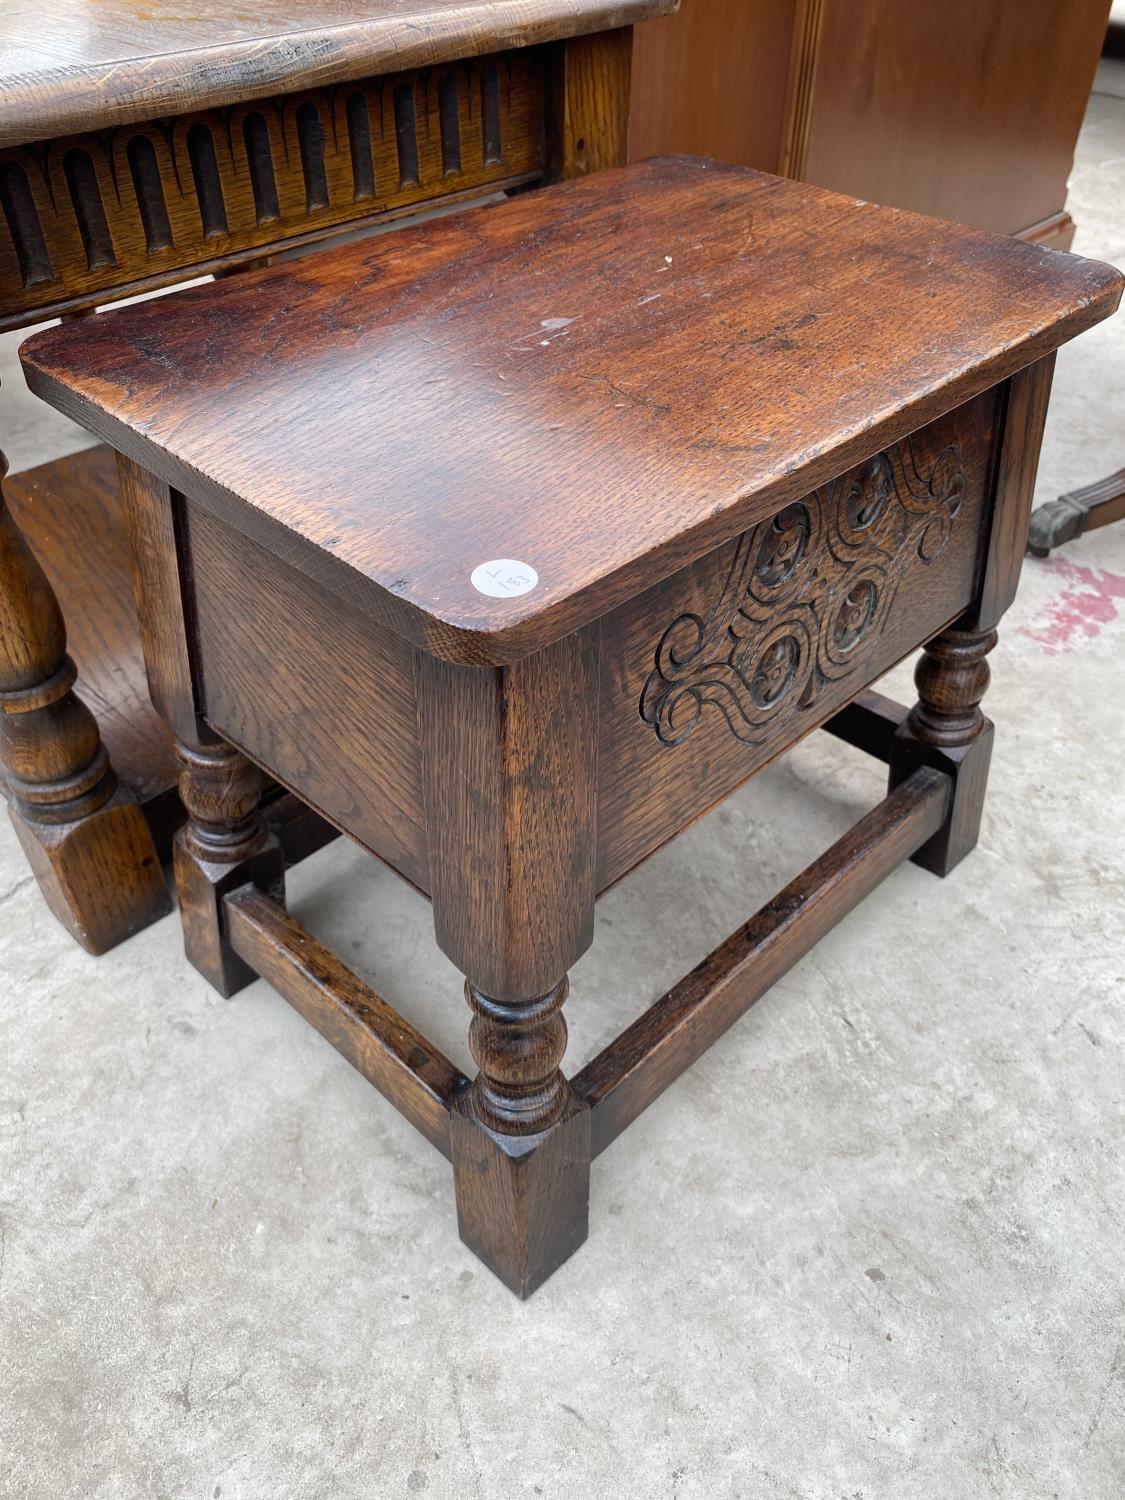 A SQUARE OAK SIDE TABLE WITH LOWER SHELF AND AN OAK STOOL WITH HINGED TOP - Image 4 of 5